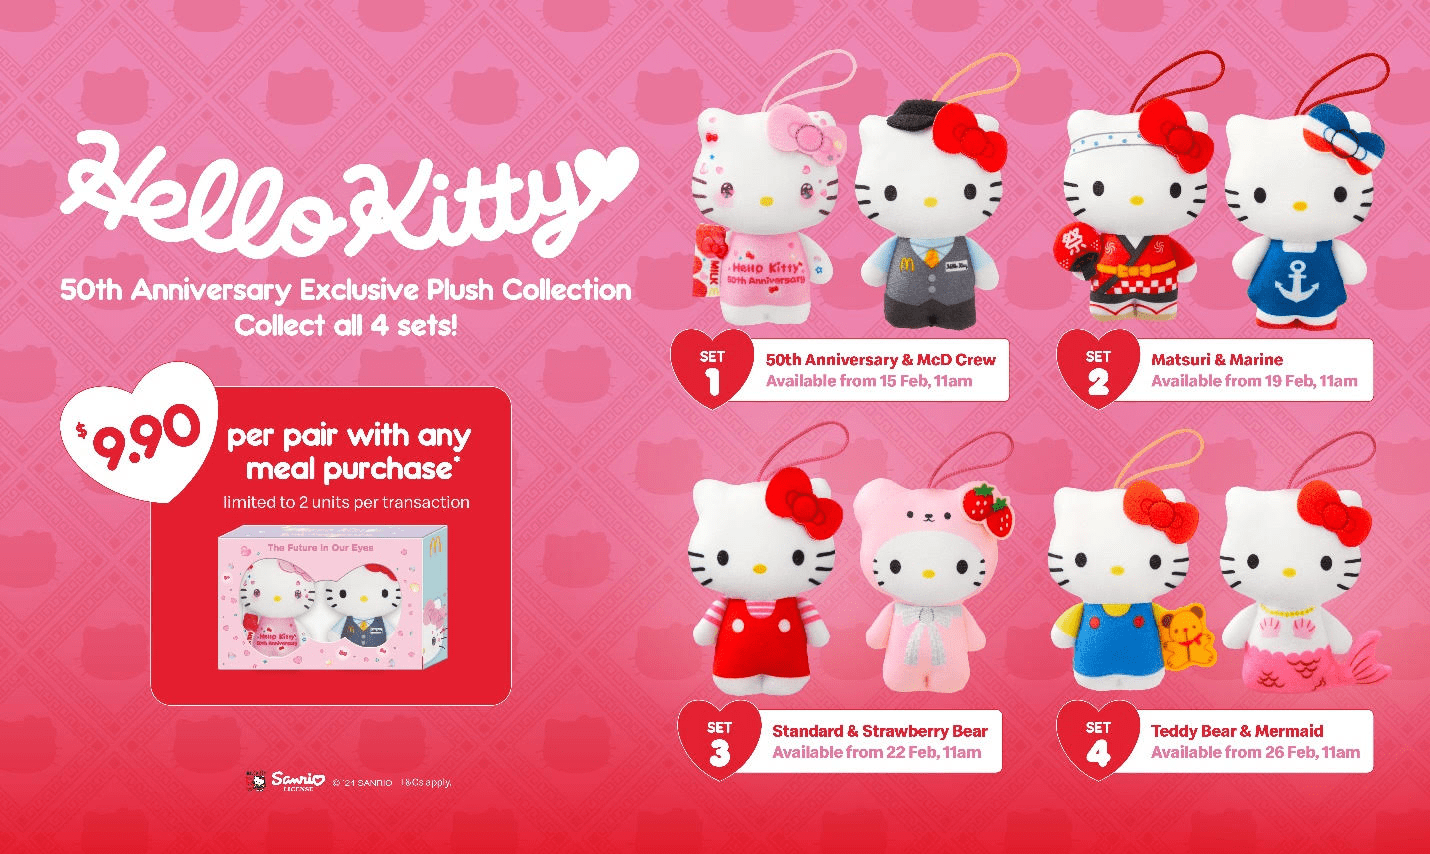 McDonald's Hello Kitty 50th Anniversary Different Sets Of Plushies